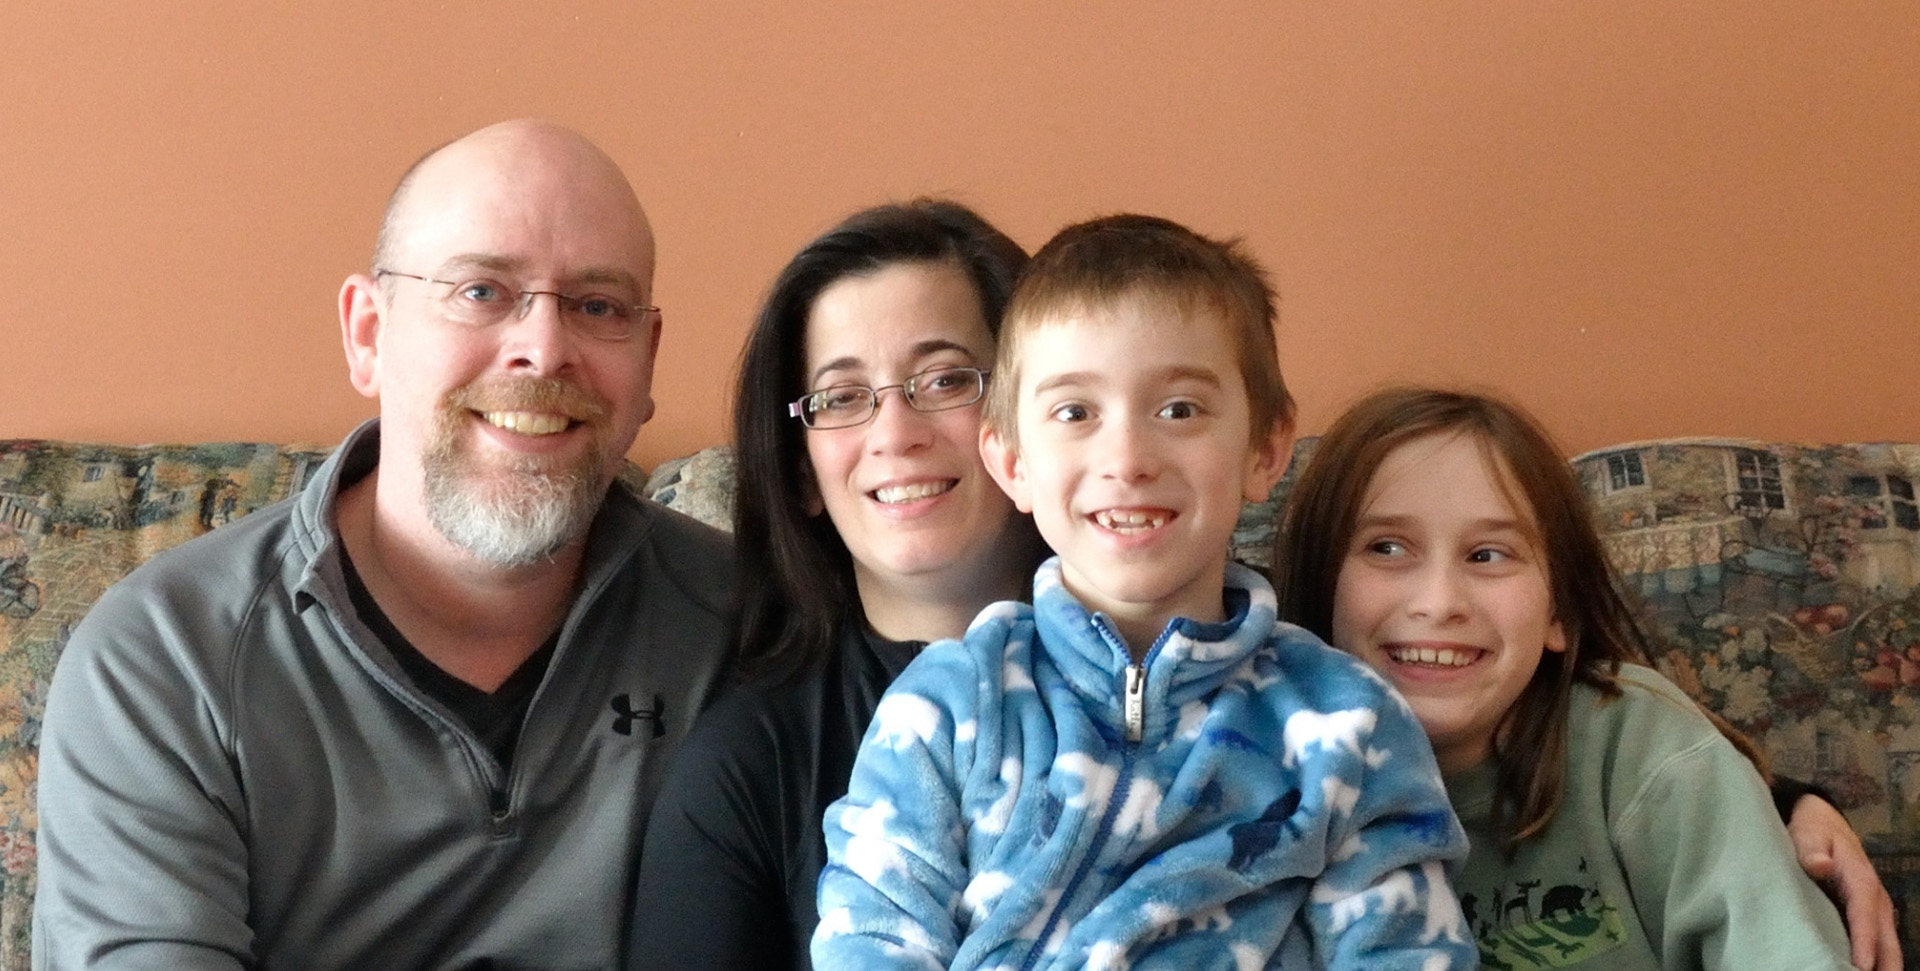 How do you live with a rare disease? “You do it one day at a time and focus on the good things,” says Malinda, in the picture, surrounded by her husband Sean and their kids Megan and Liam